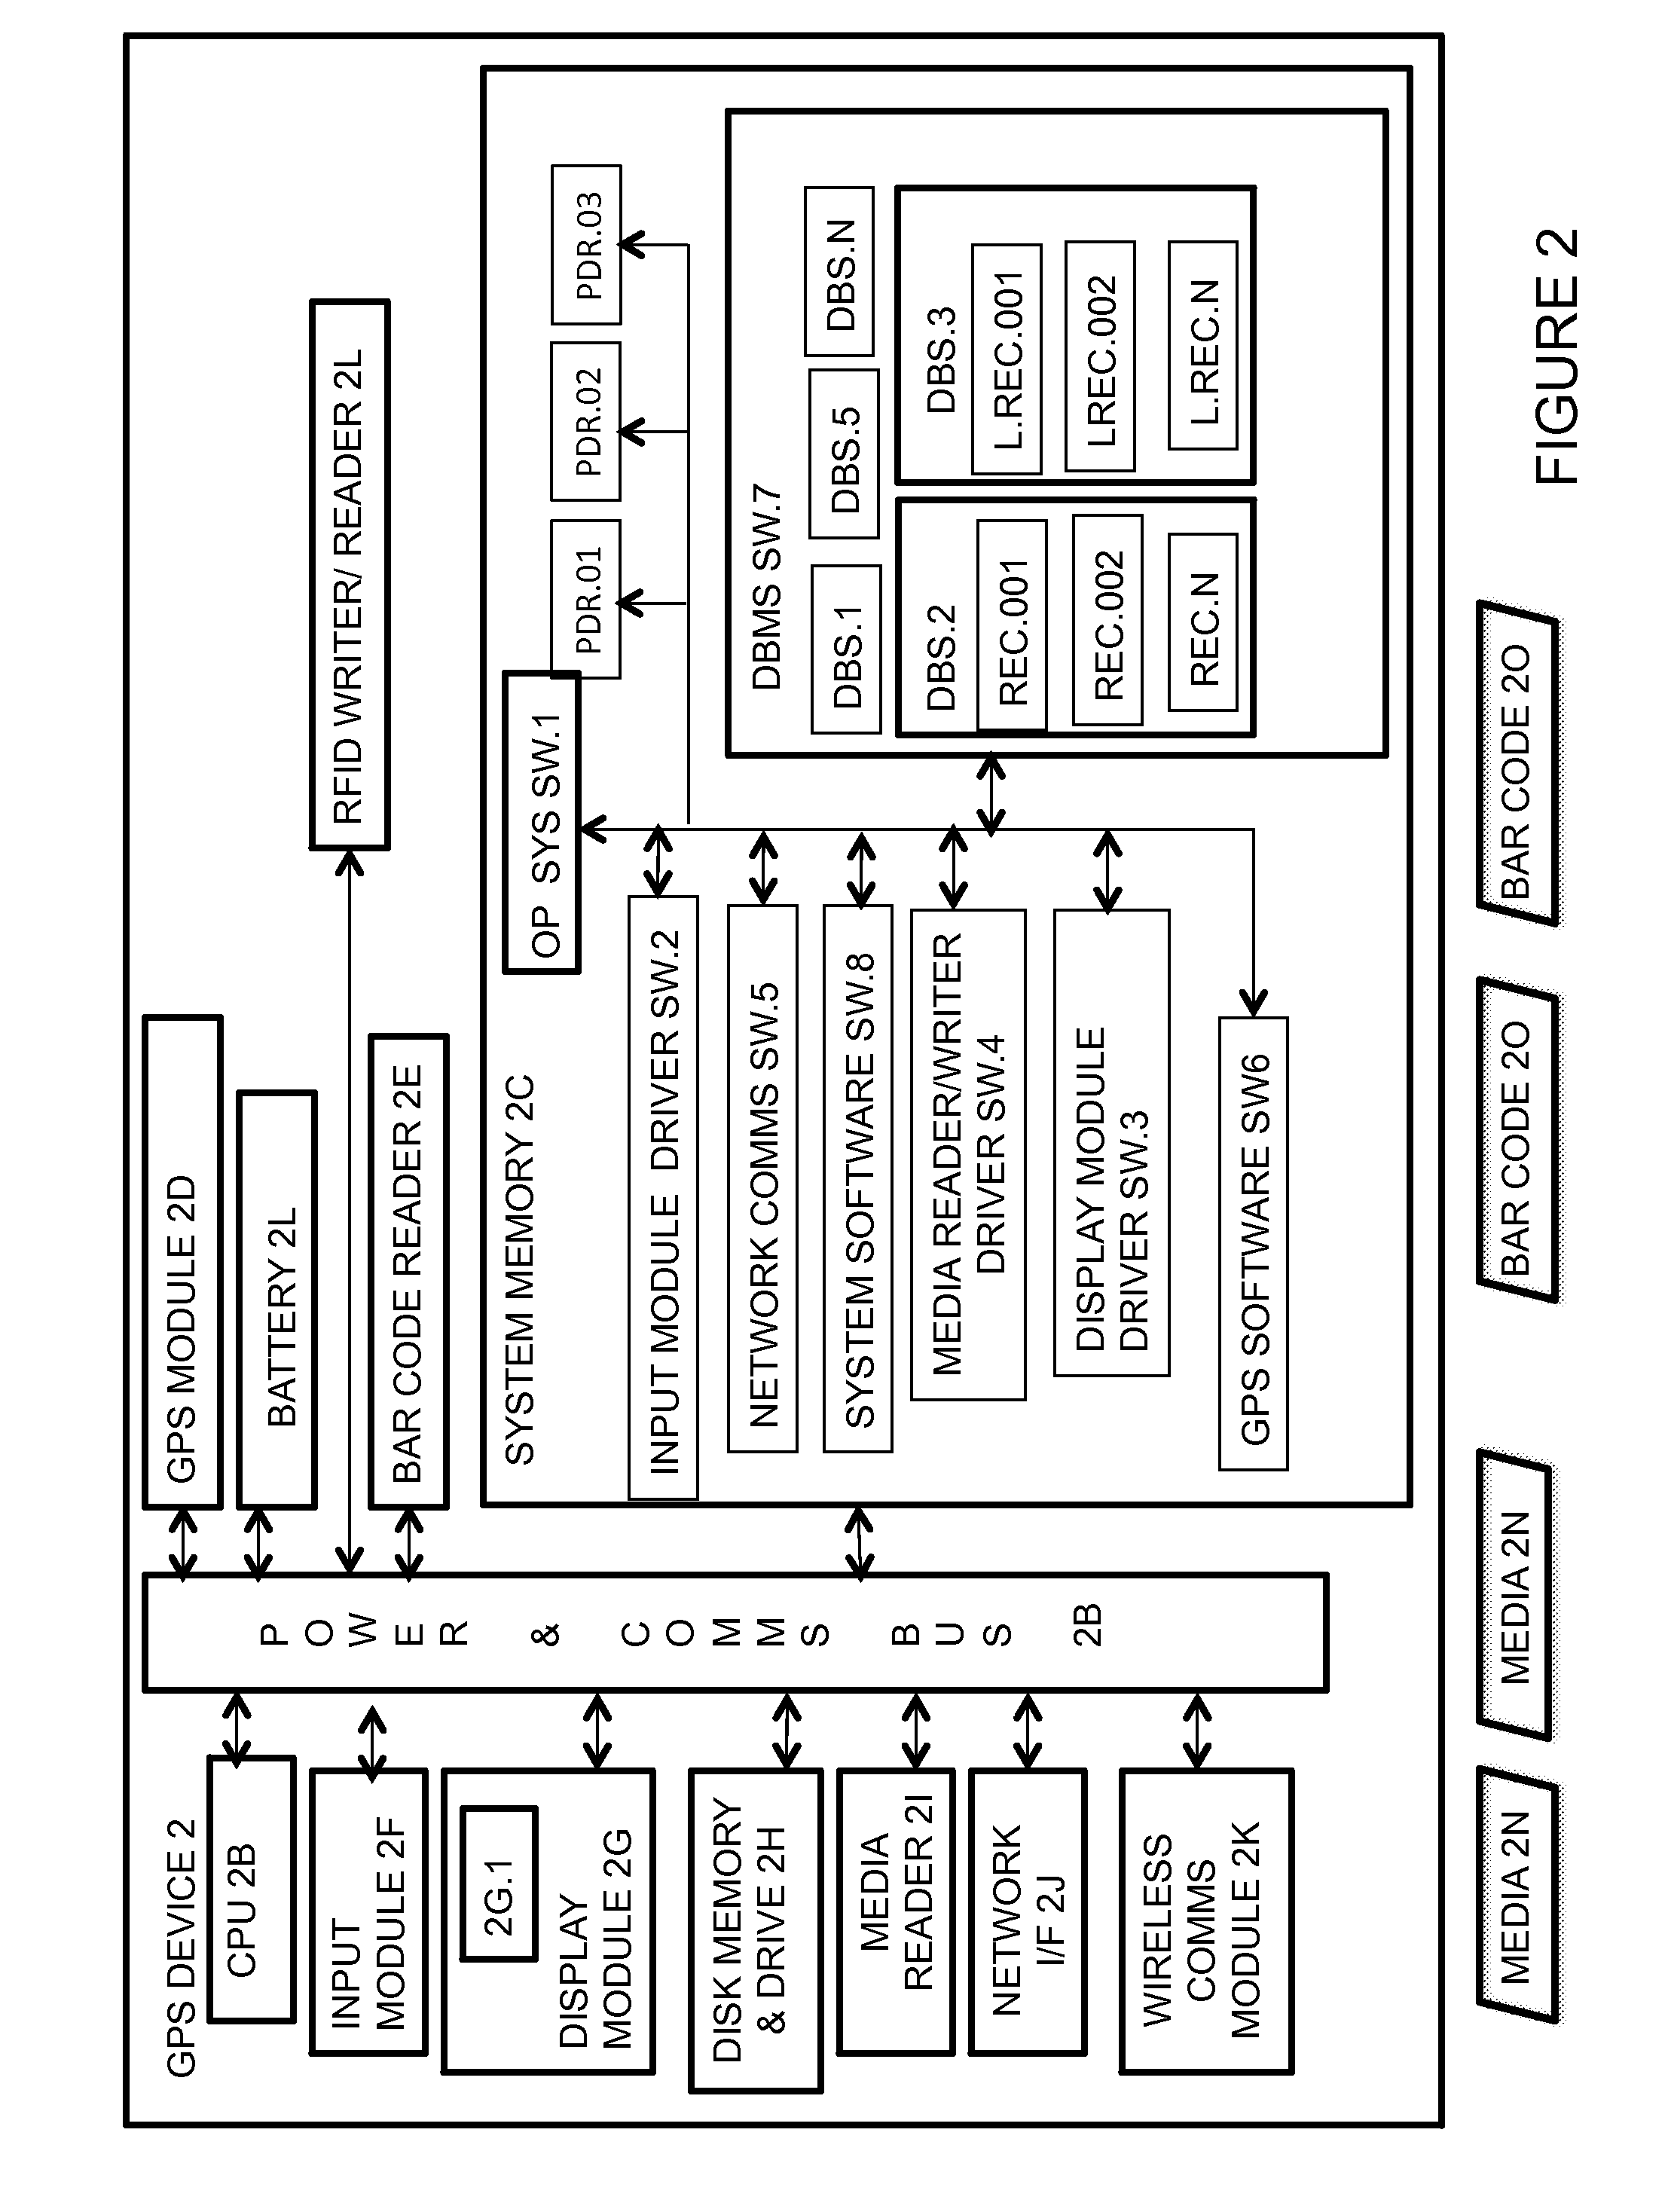 Method and system for associating container labels with product units